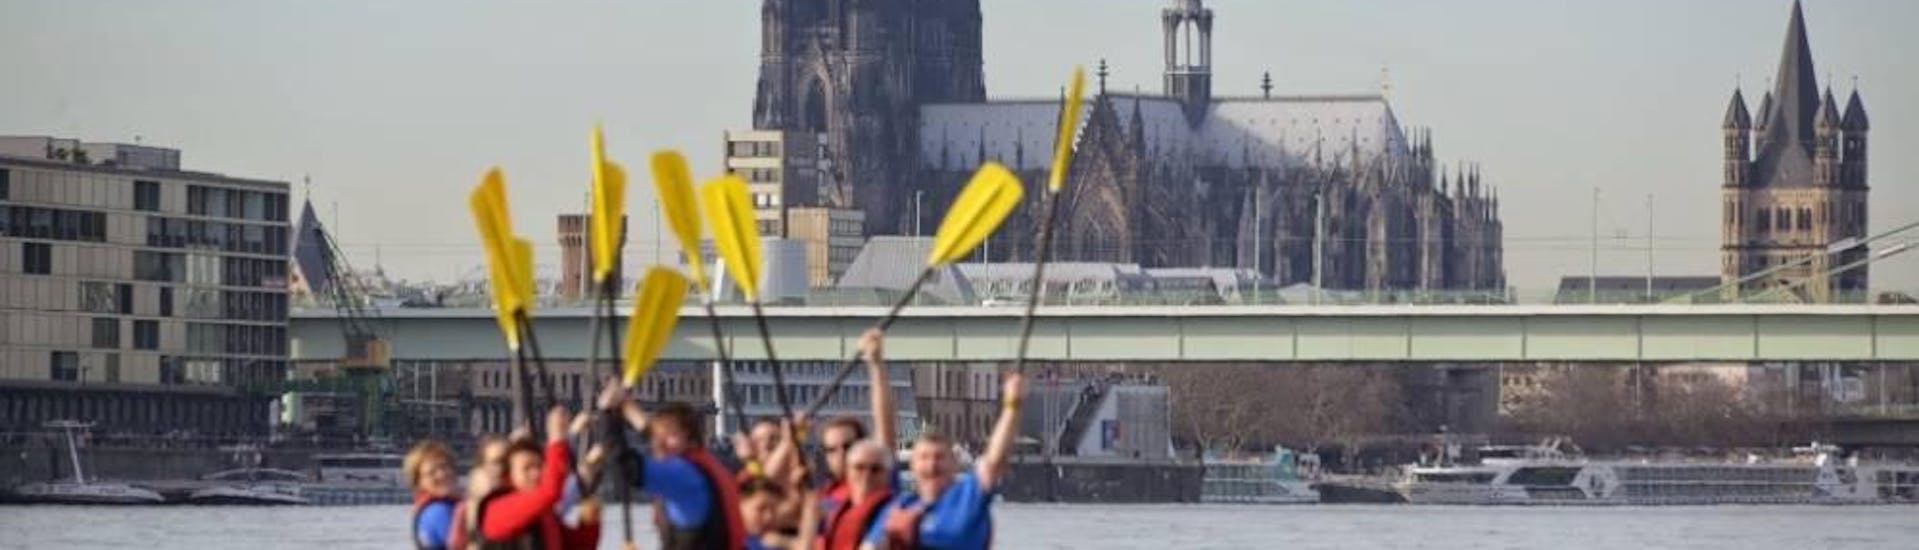 Rafting facile a Cologne - Lower Rhine.